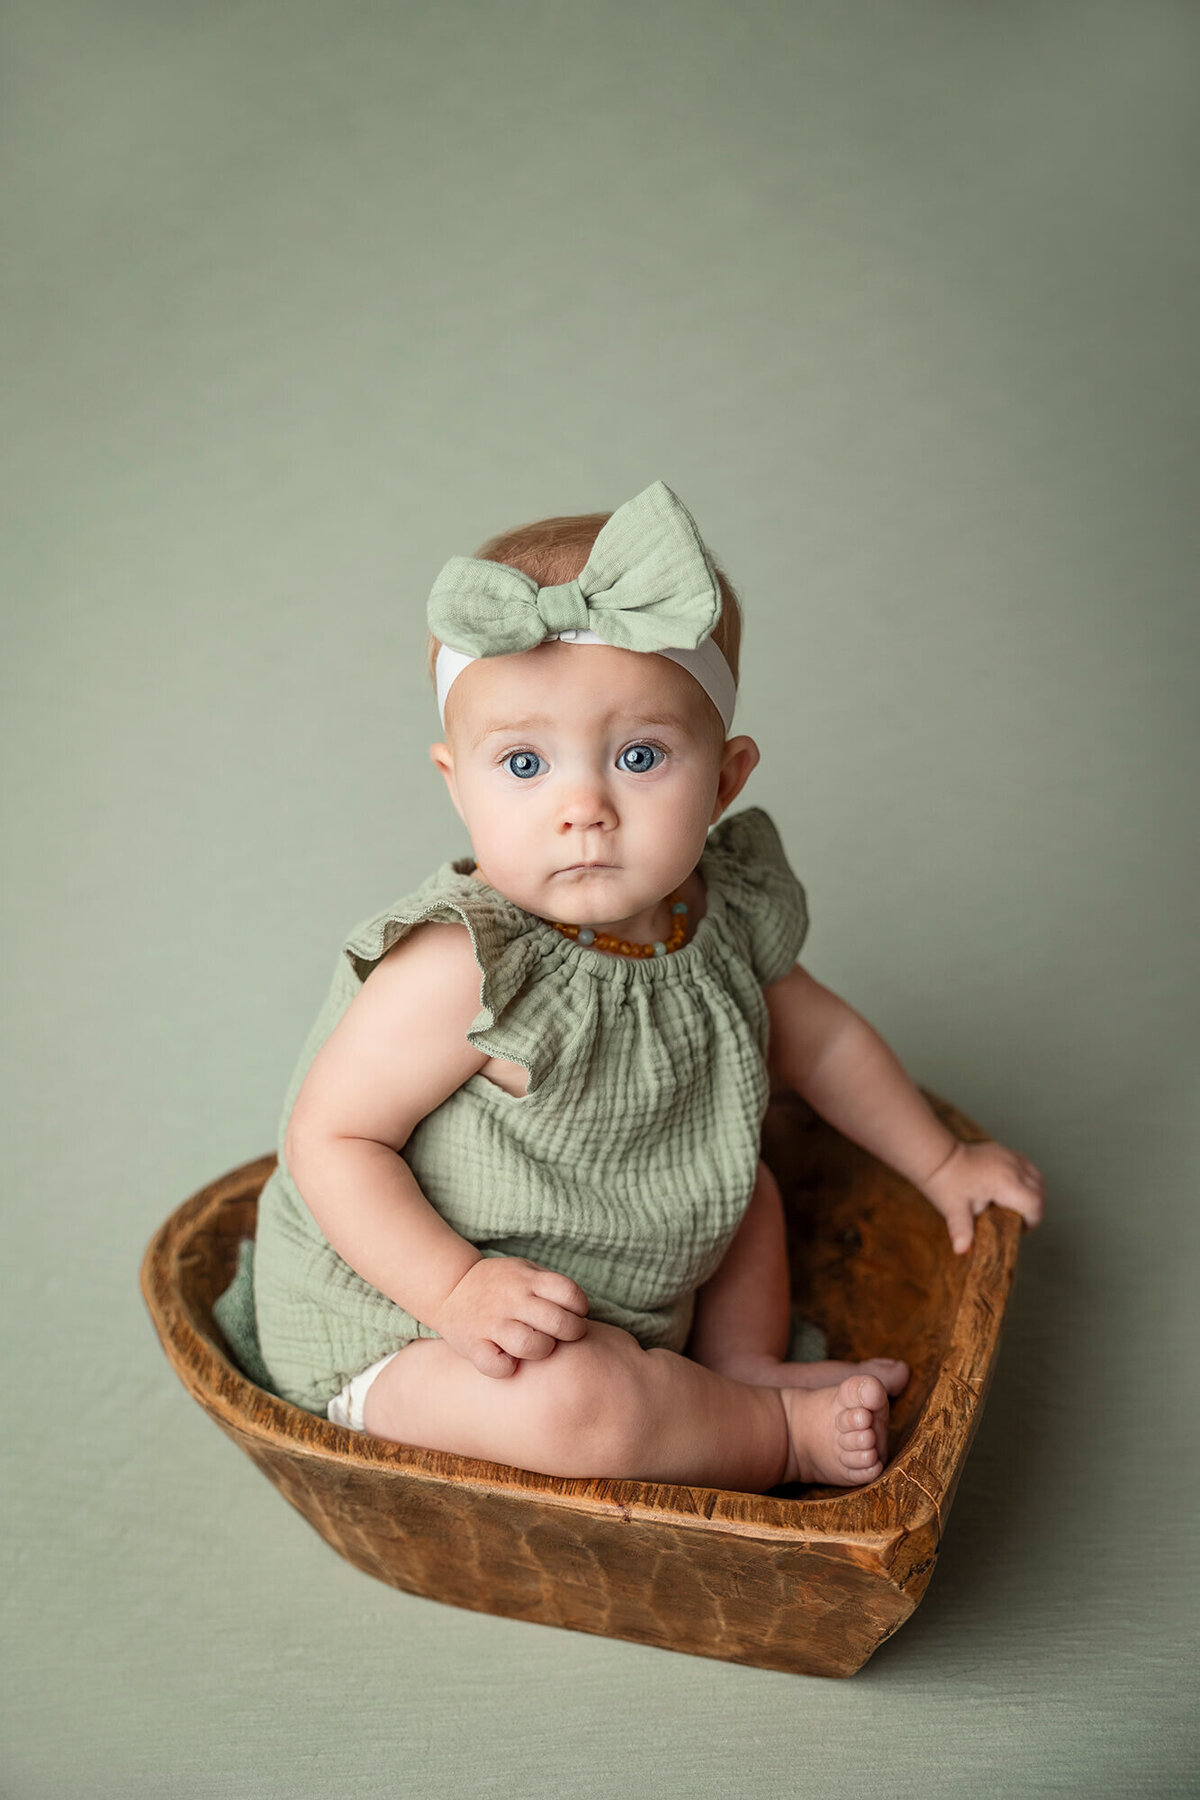 Six month old baby girl sitting in wooden heart bowl.